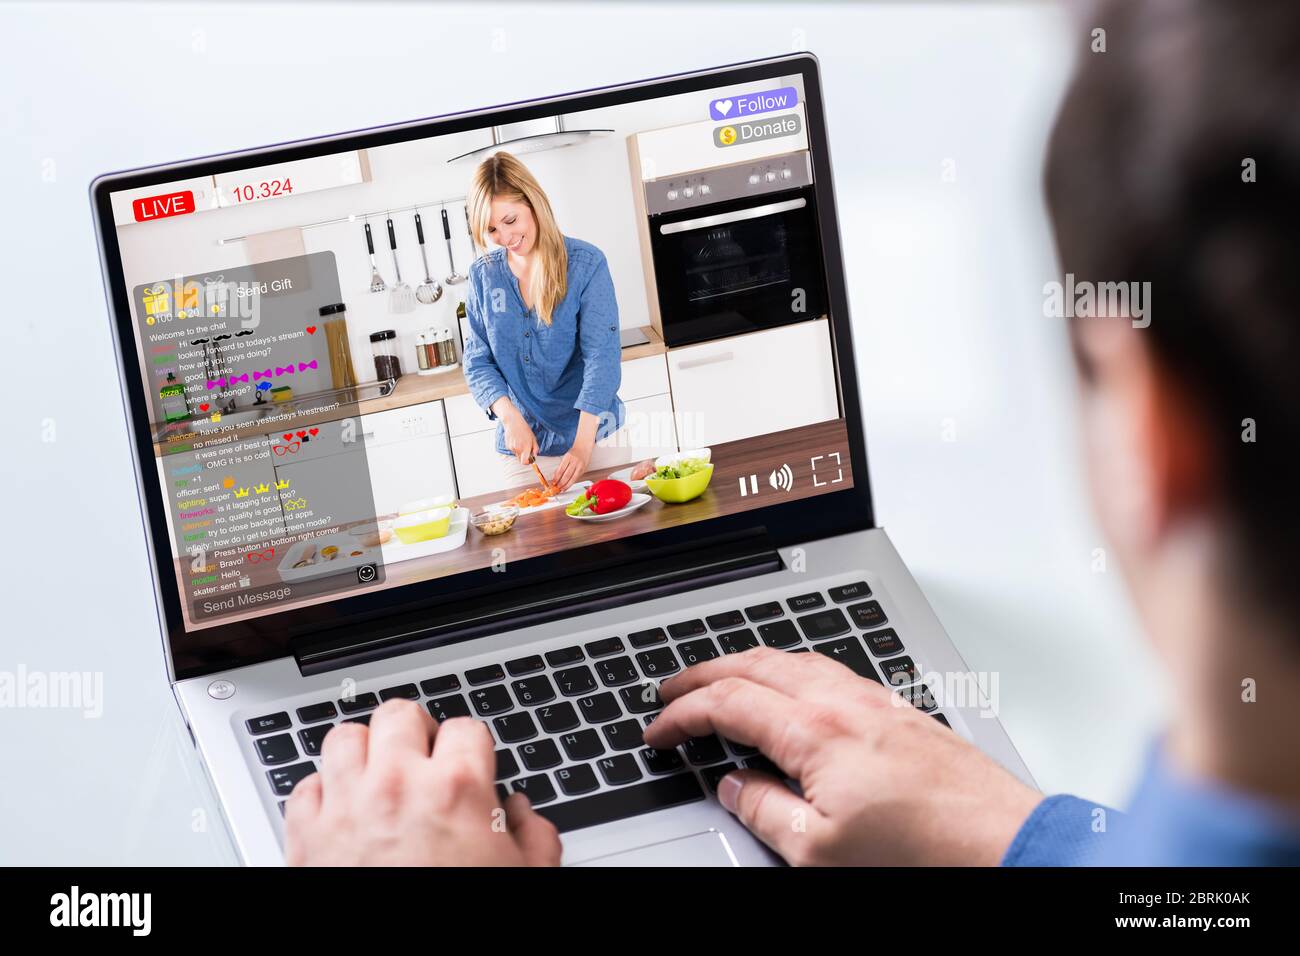 Streaming Live Cooking Internet Show On Laptop Stock Photo